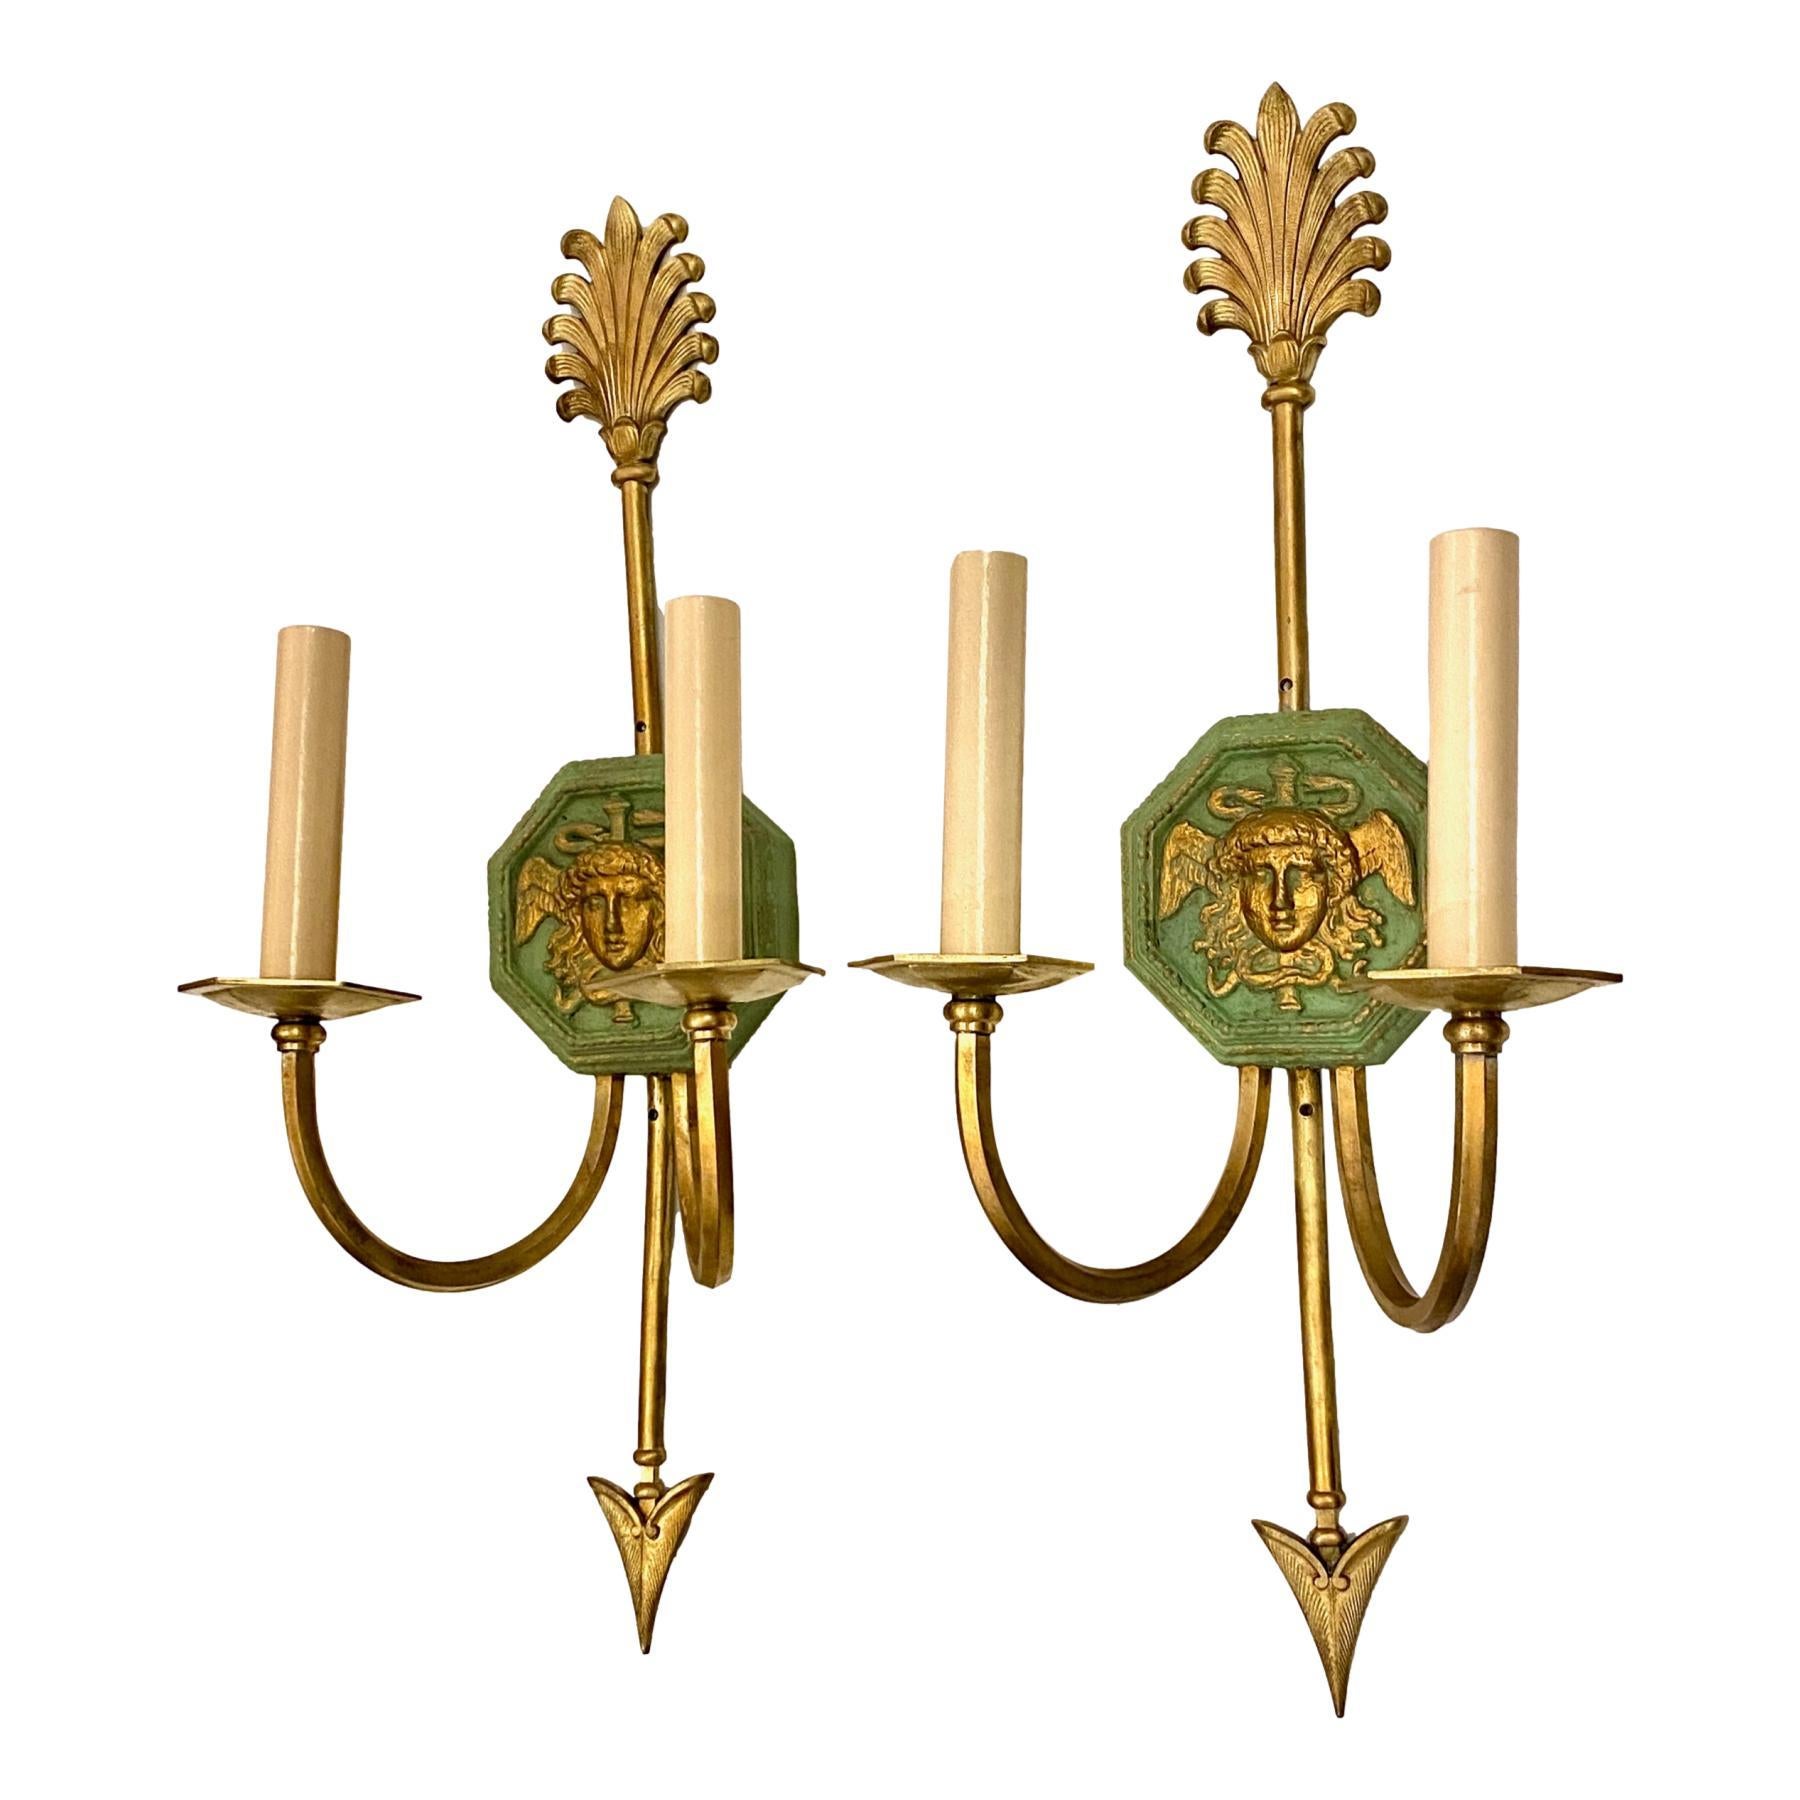 A pair of circa 1920's French painted and gilt sconces with neoclassic design and gilt bronze body.

Measurements:
Height: 20